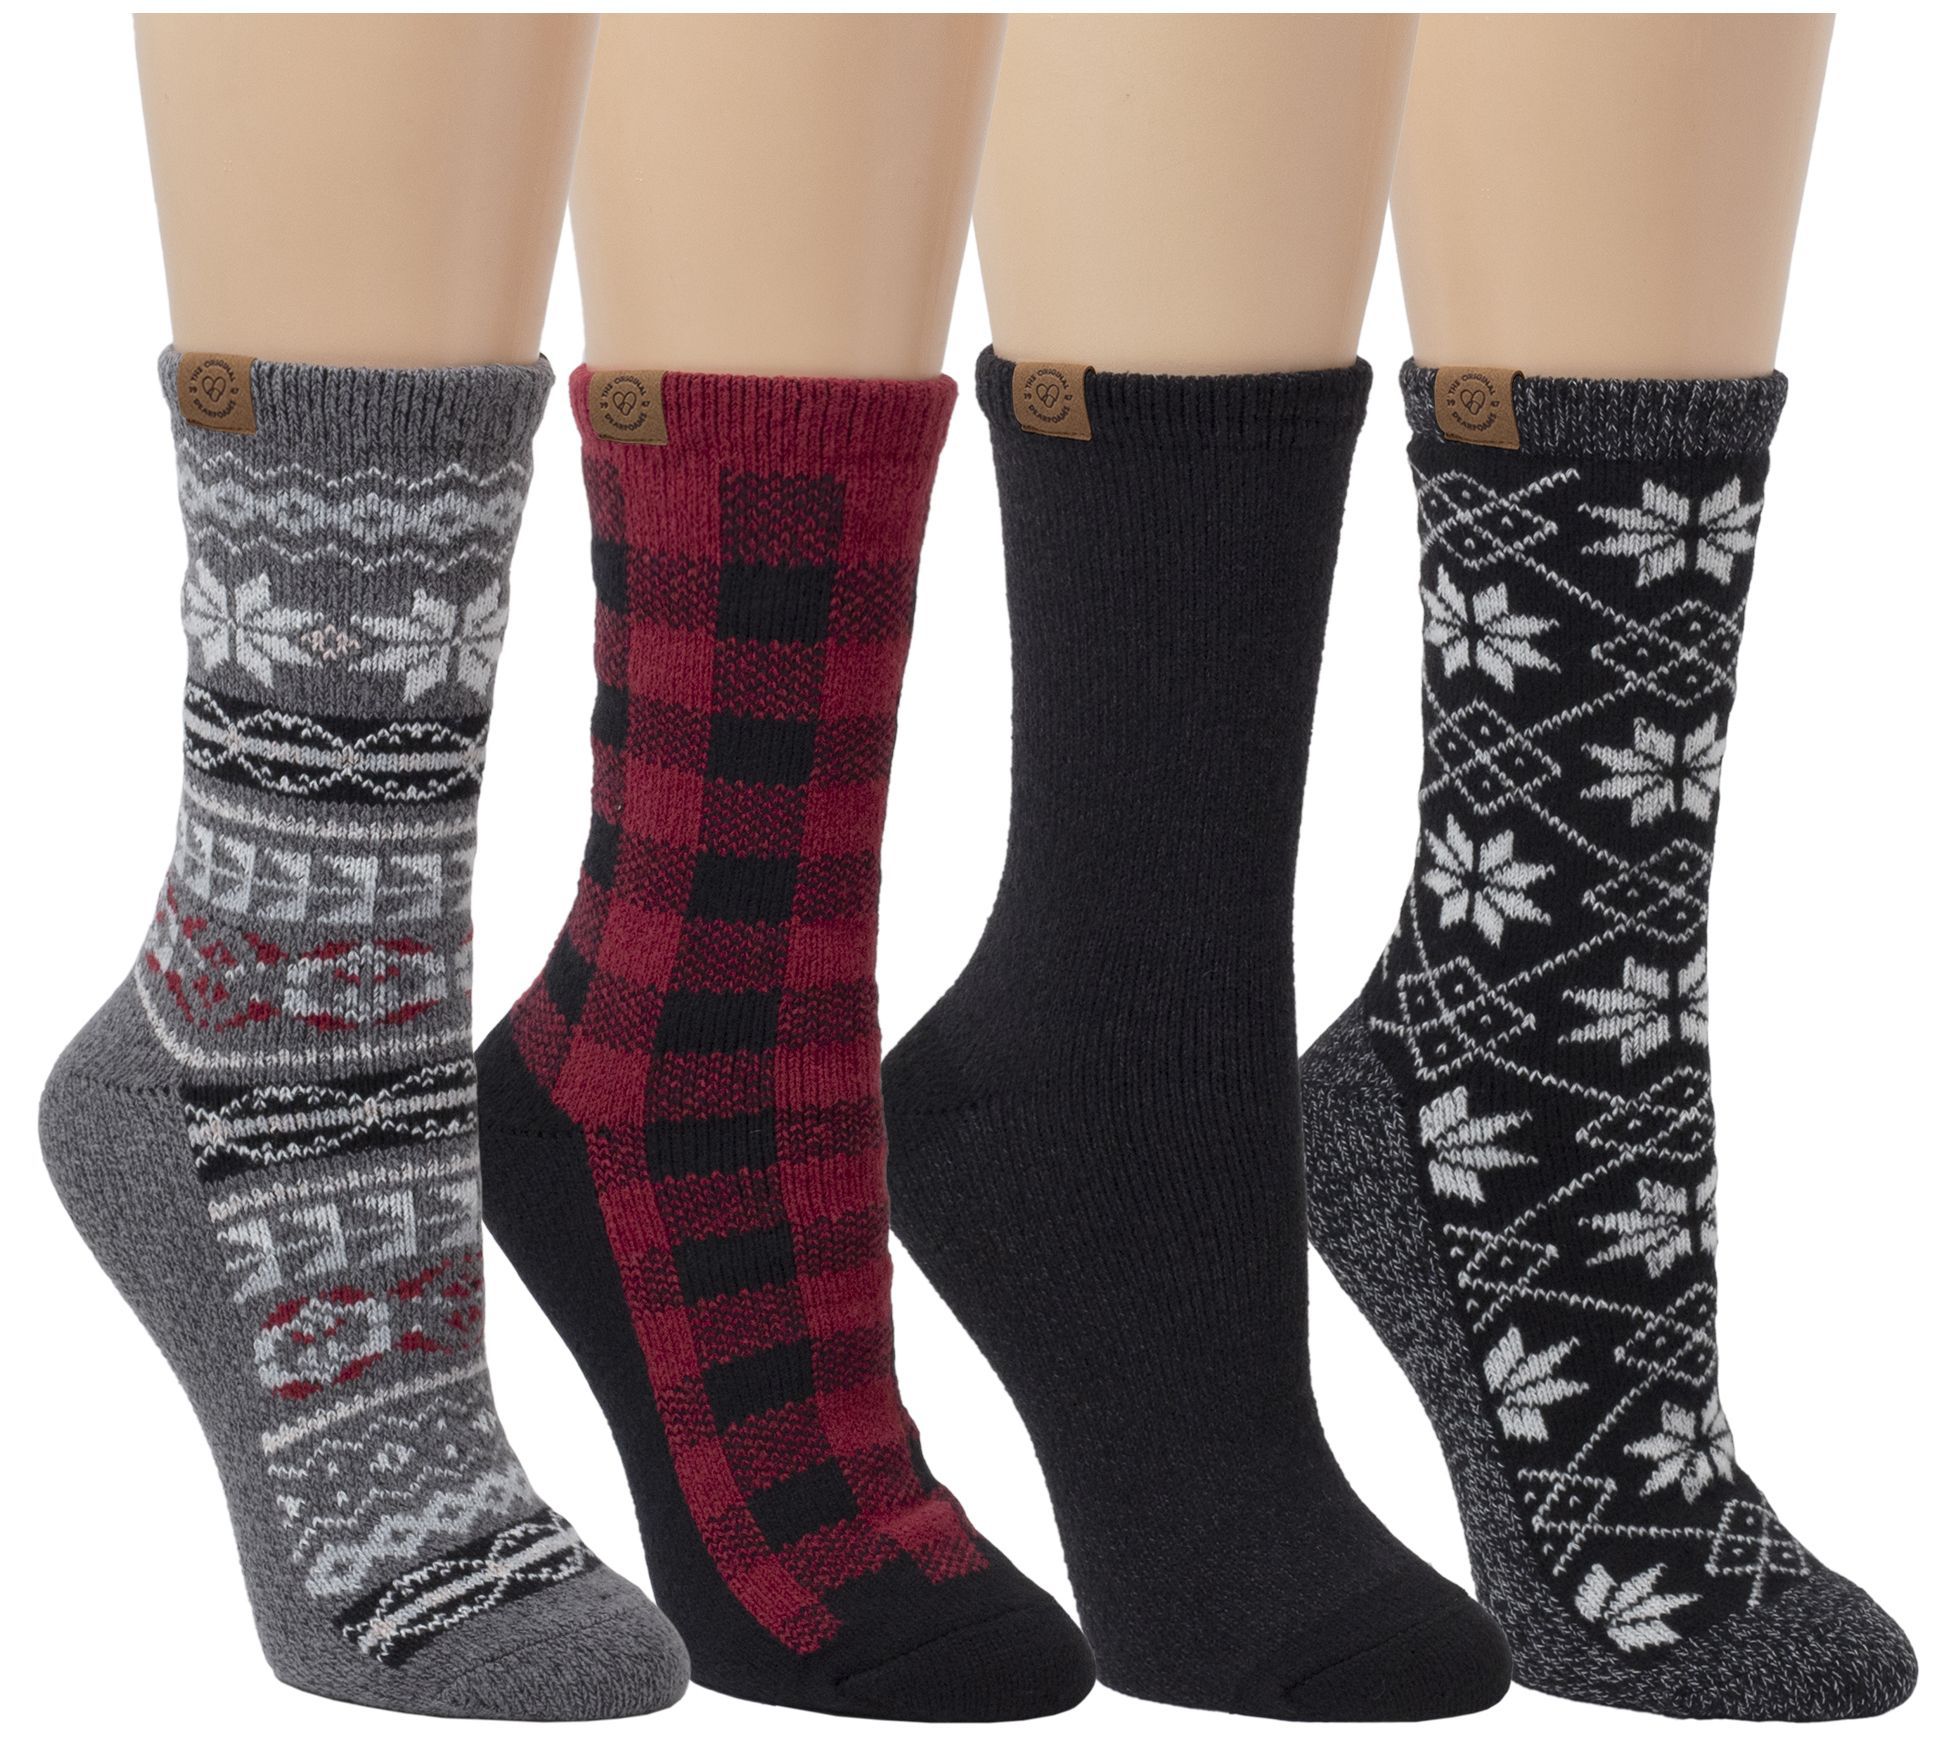 5 Pairs) Classic Argyle Socks Men Solid Fashion Socks Loafer Daily